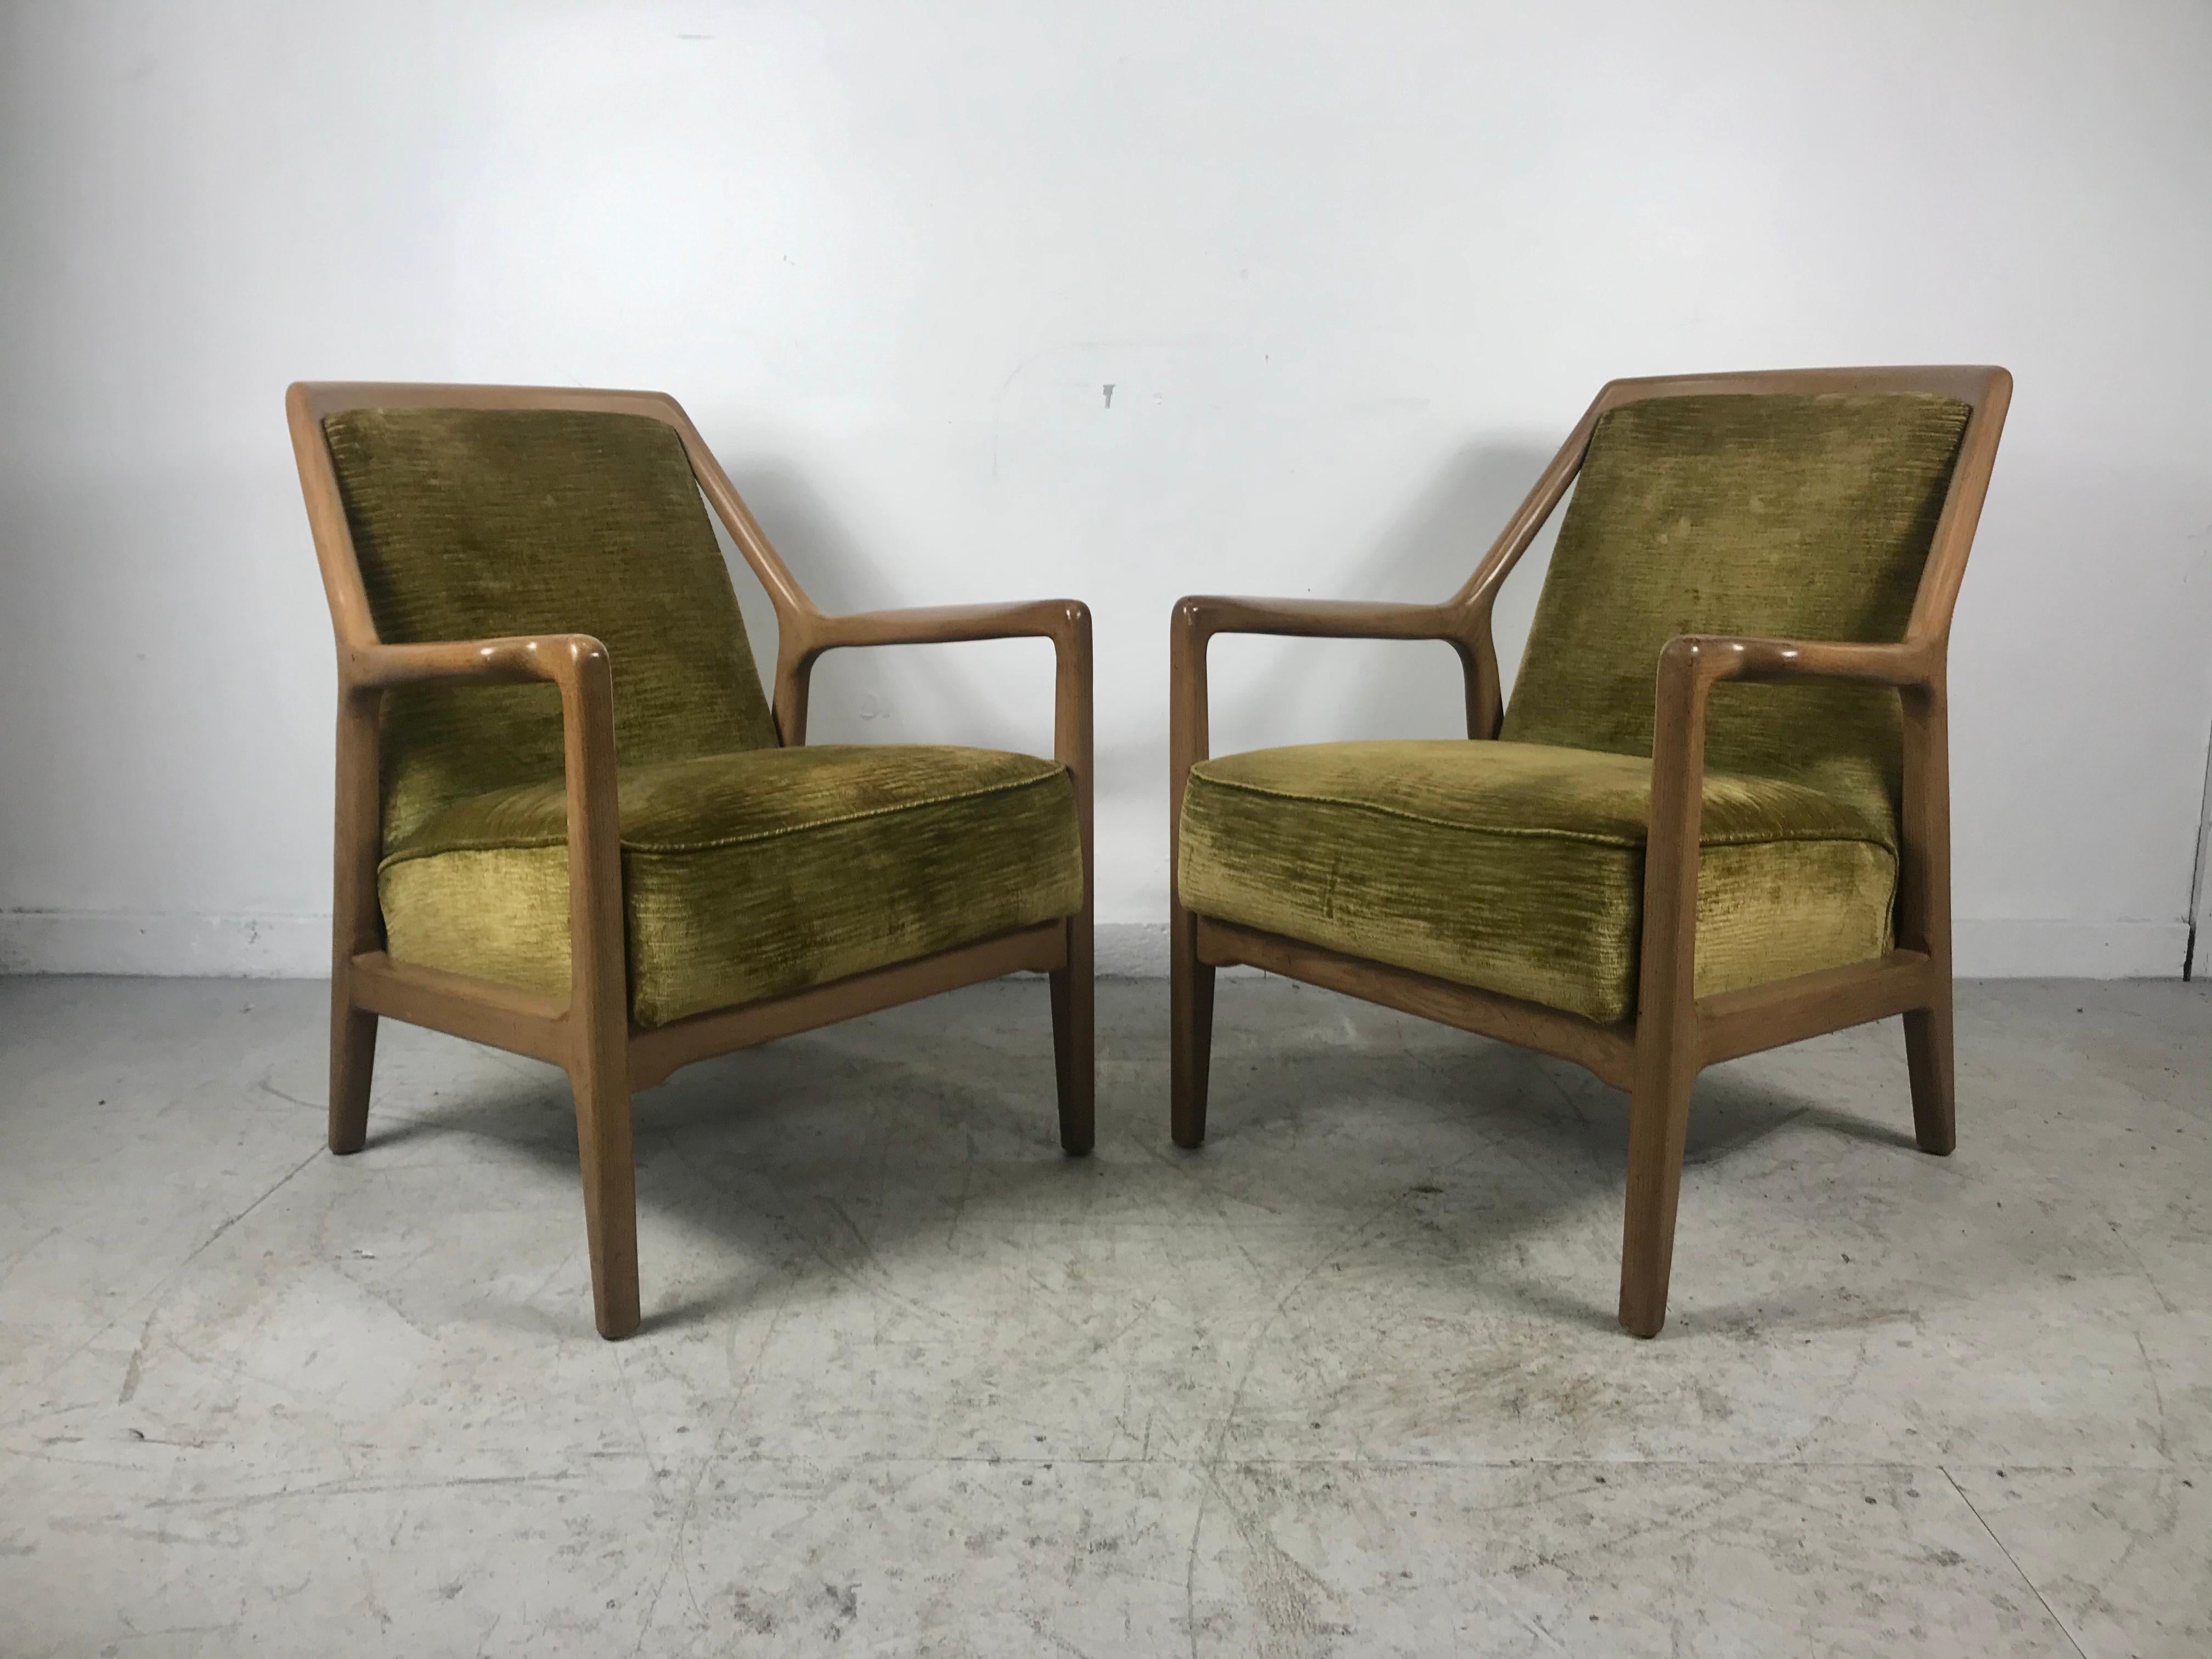 Handsome pair of Mid-Century Modern lounge club chairs by Jack Van der Molen for the Ash Group by Jamestown Lounge Company. They wear their original crushed velvet fabric and tobacco finish which are in amazing vintage condition. Extremely